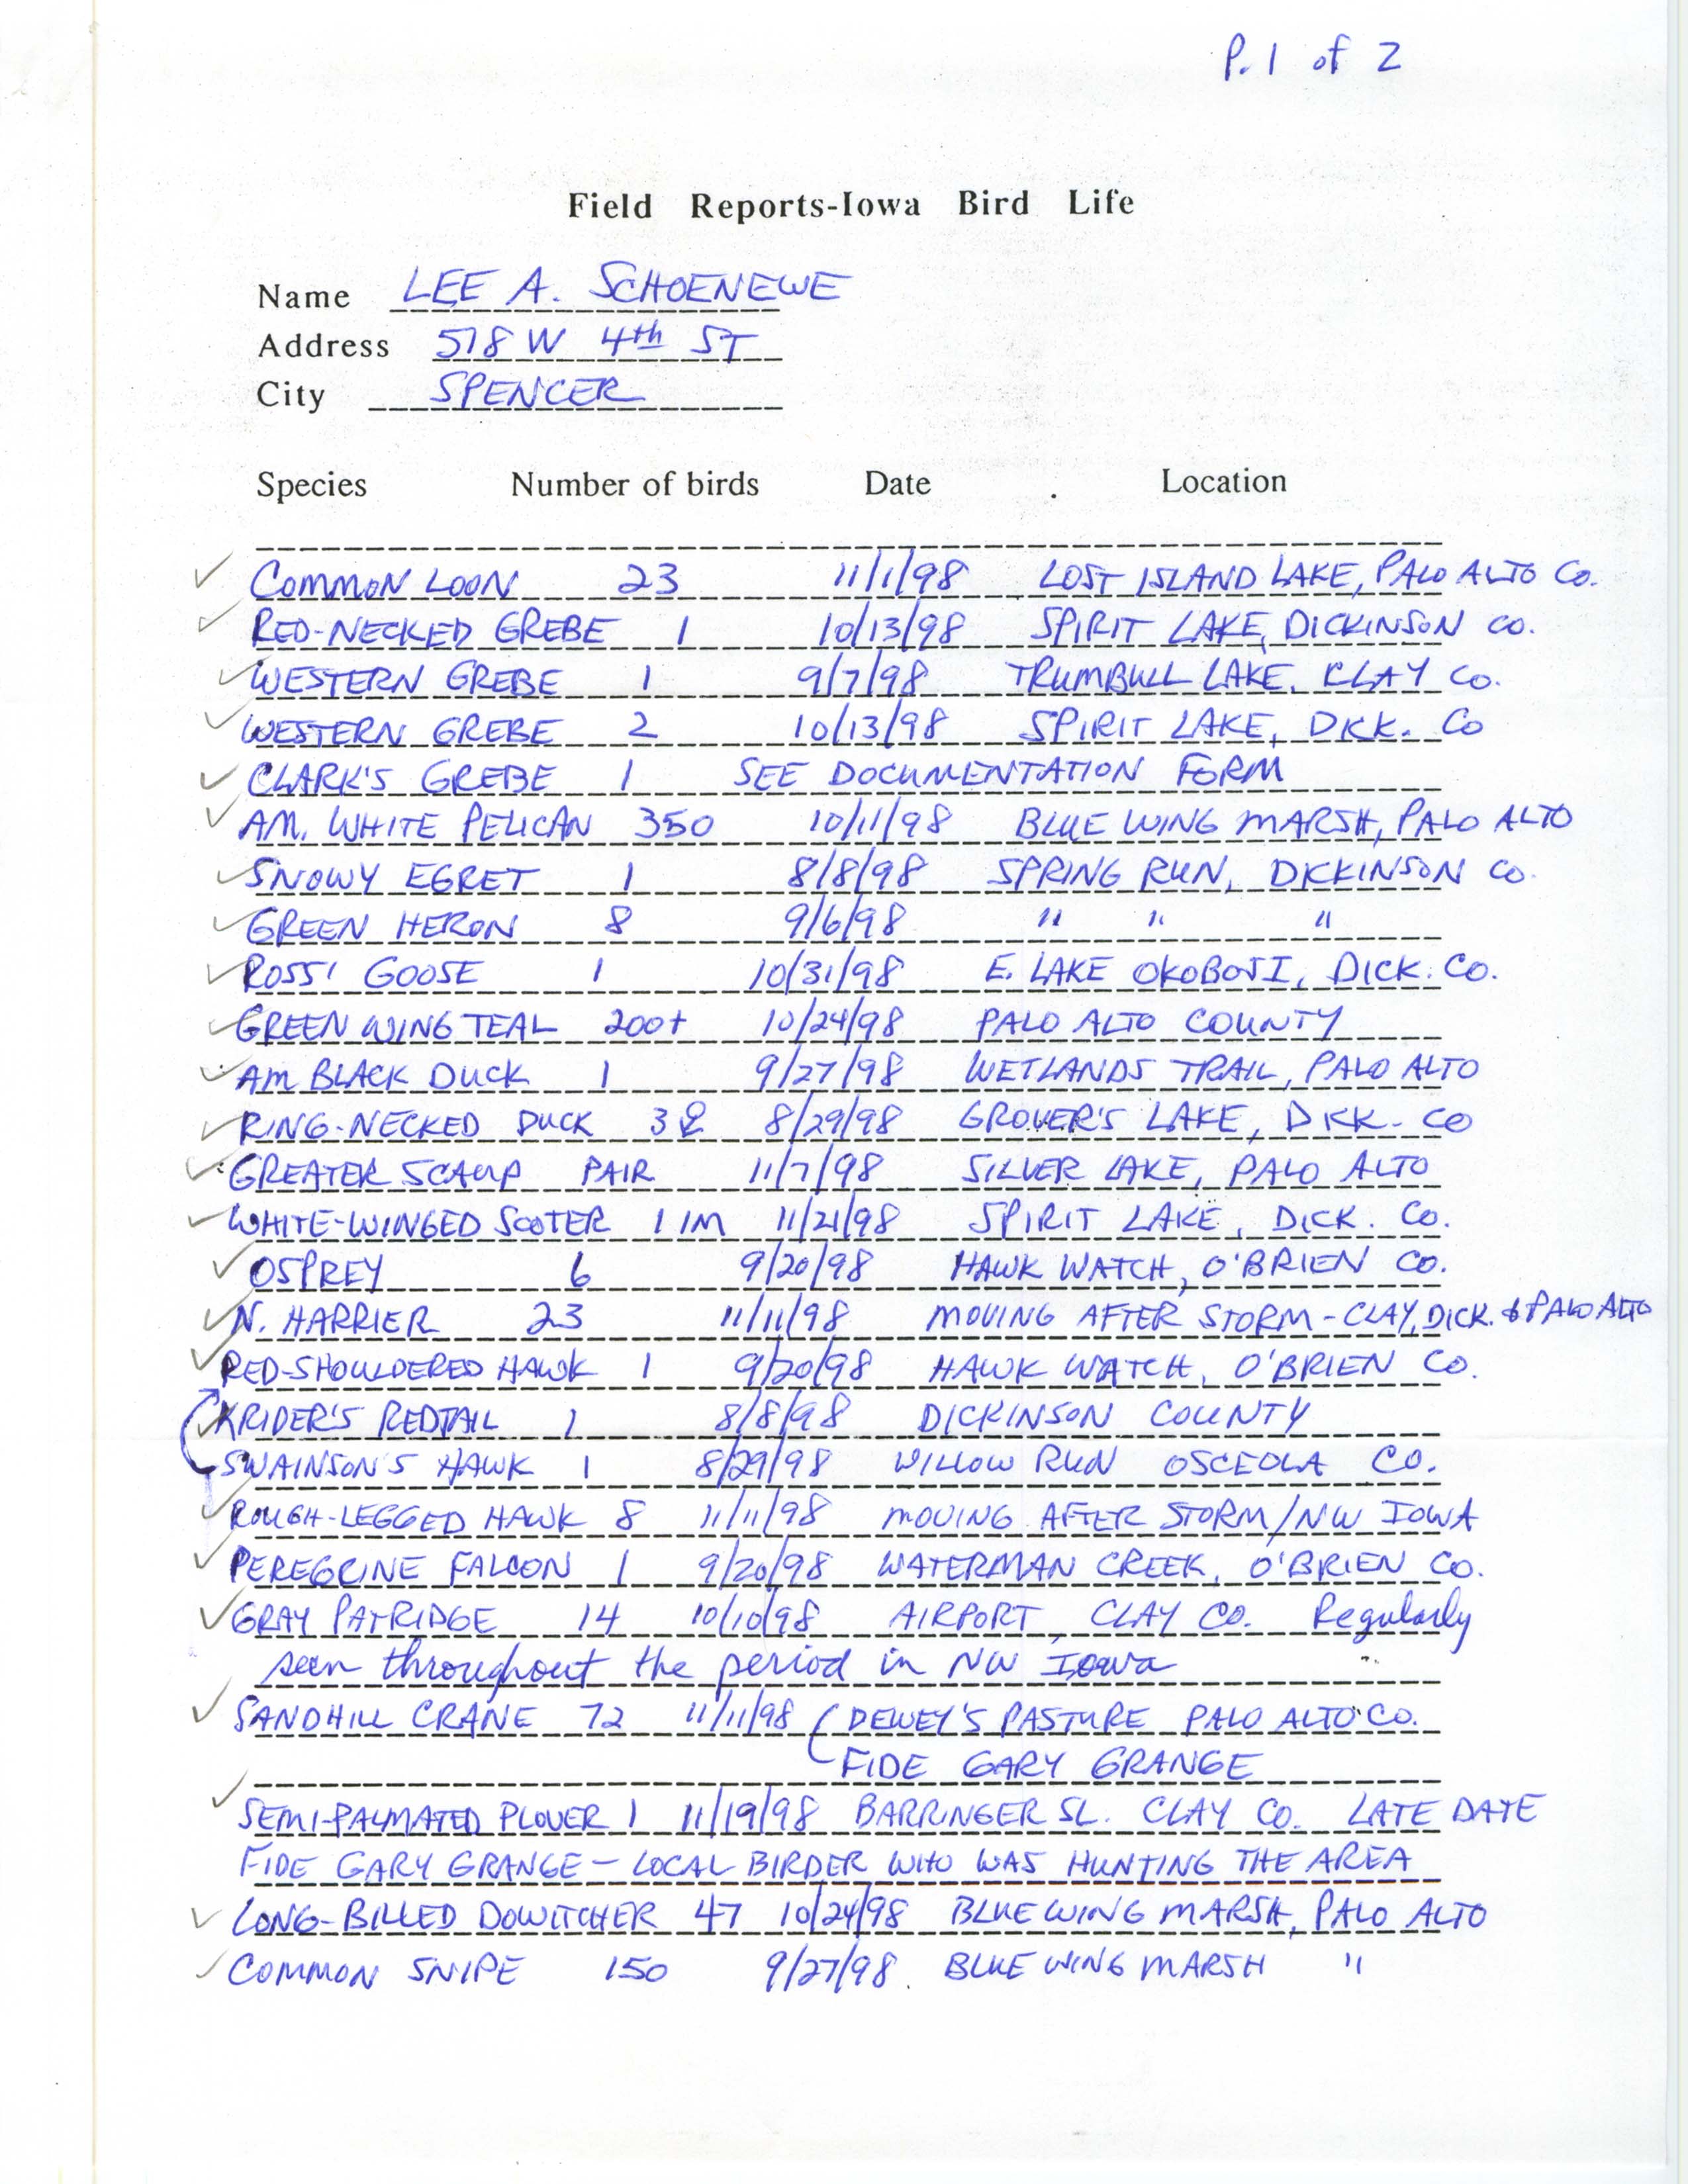 Field notes contributed by Lee A. Schoenewe, fall 1998